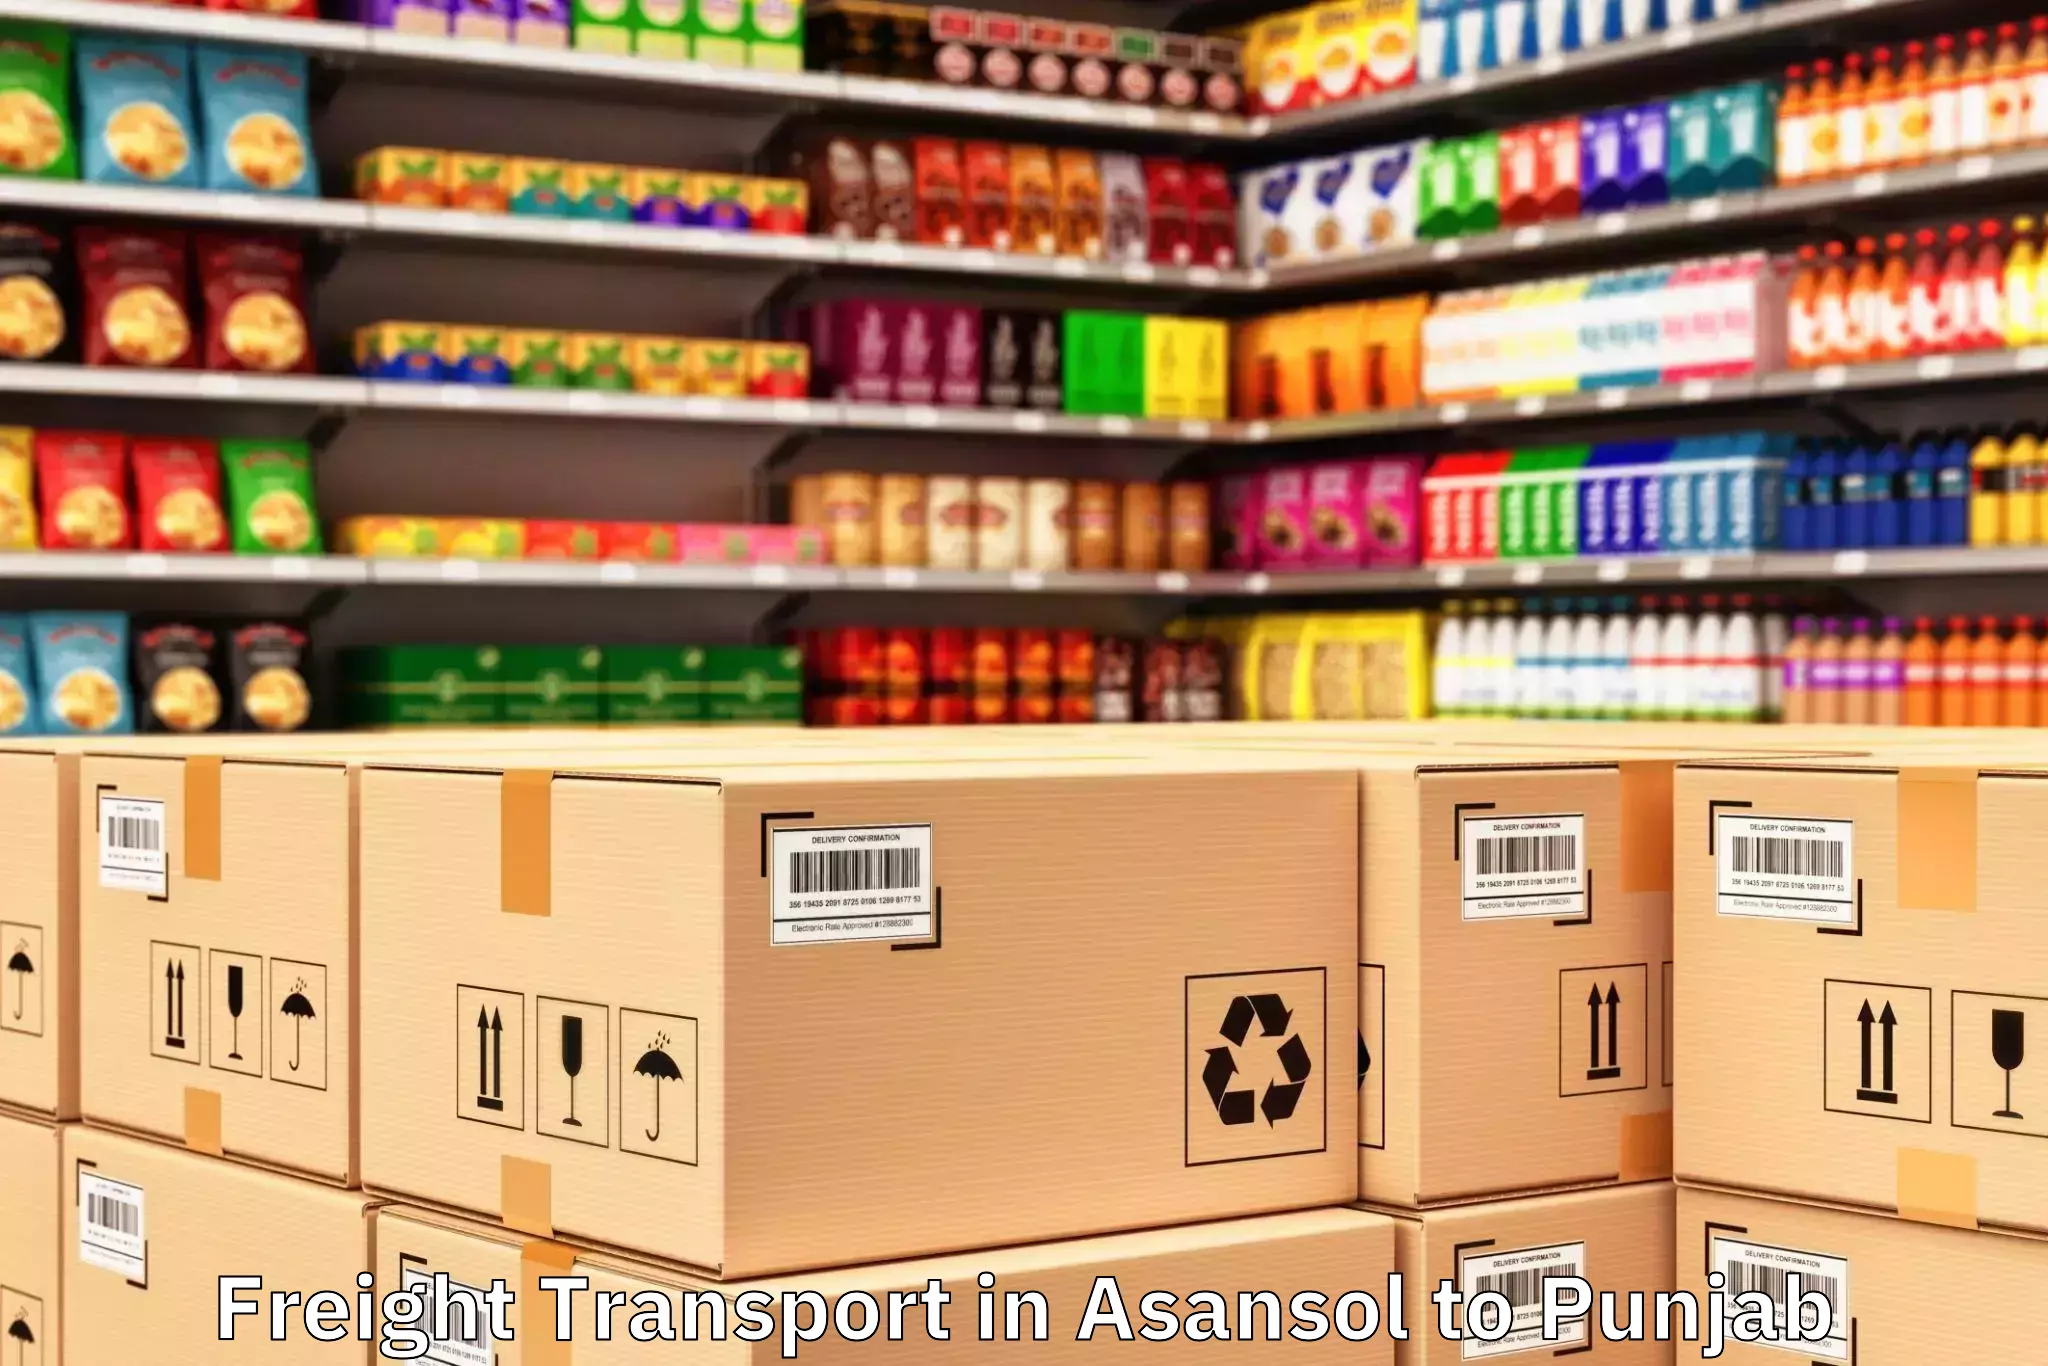 Top Asansol to Shahkot Freight Transport Available